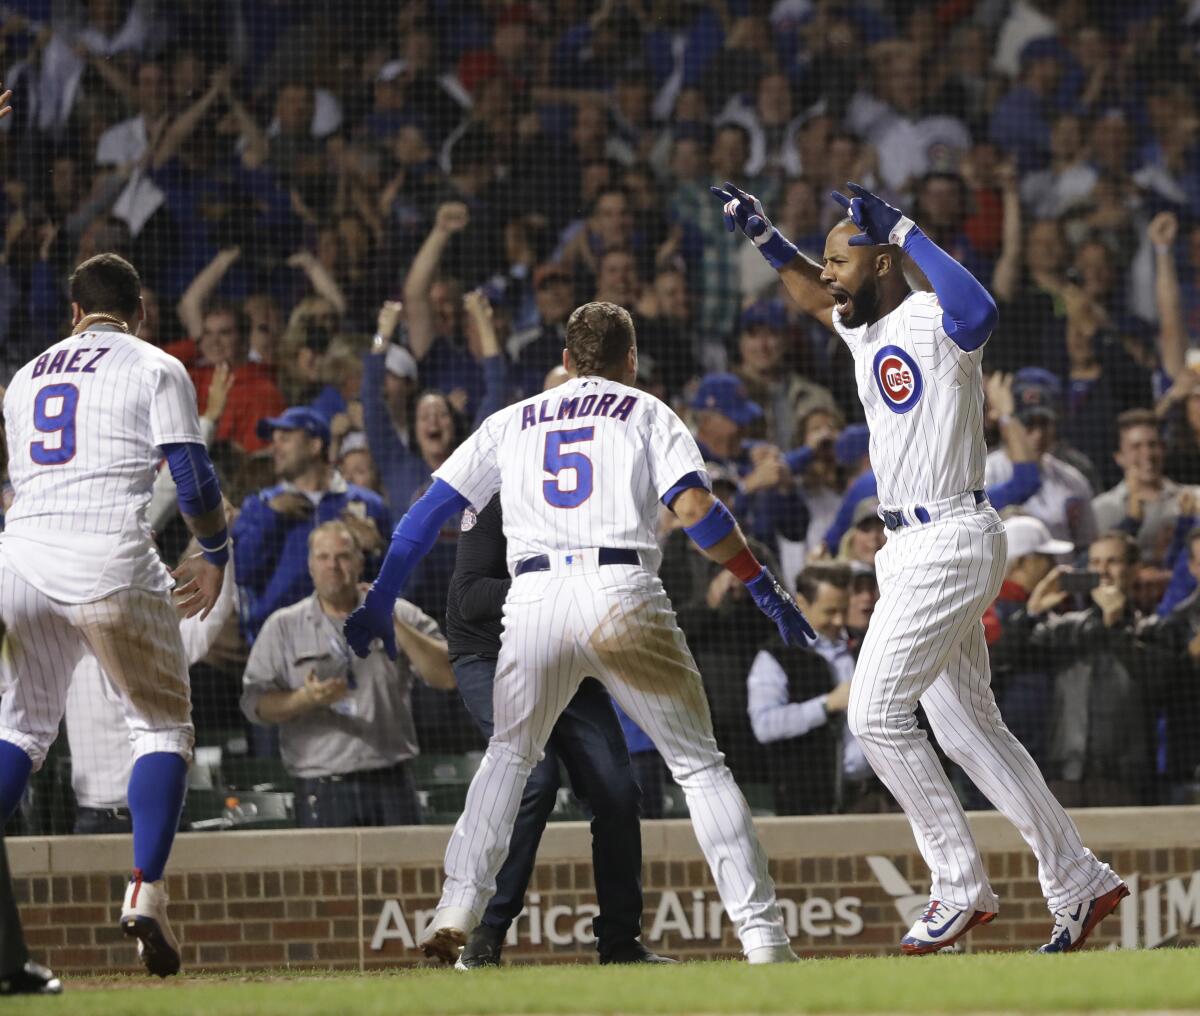 Heyward plans to keep on playing, even if not with Cubs - The San